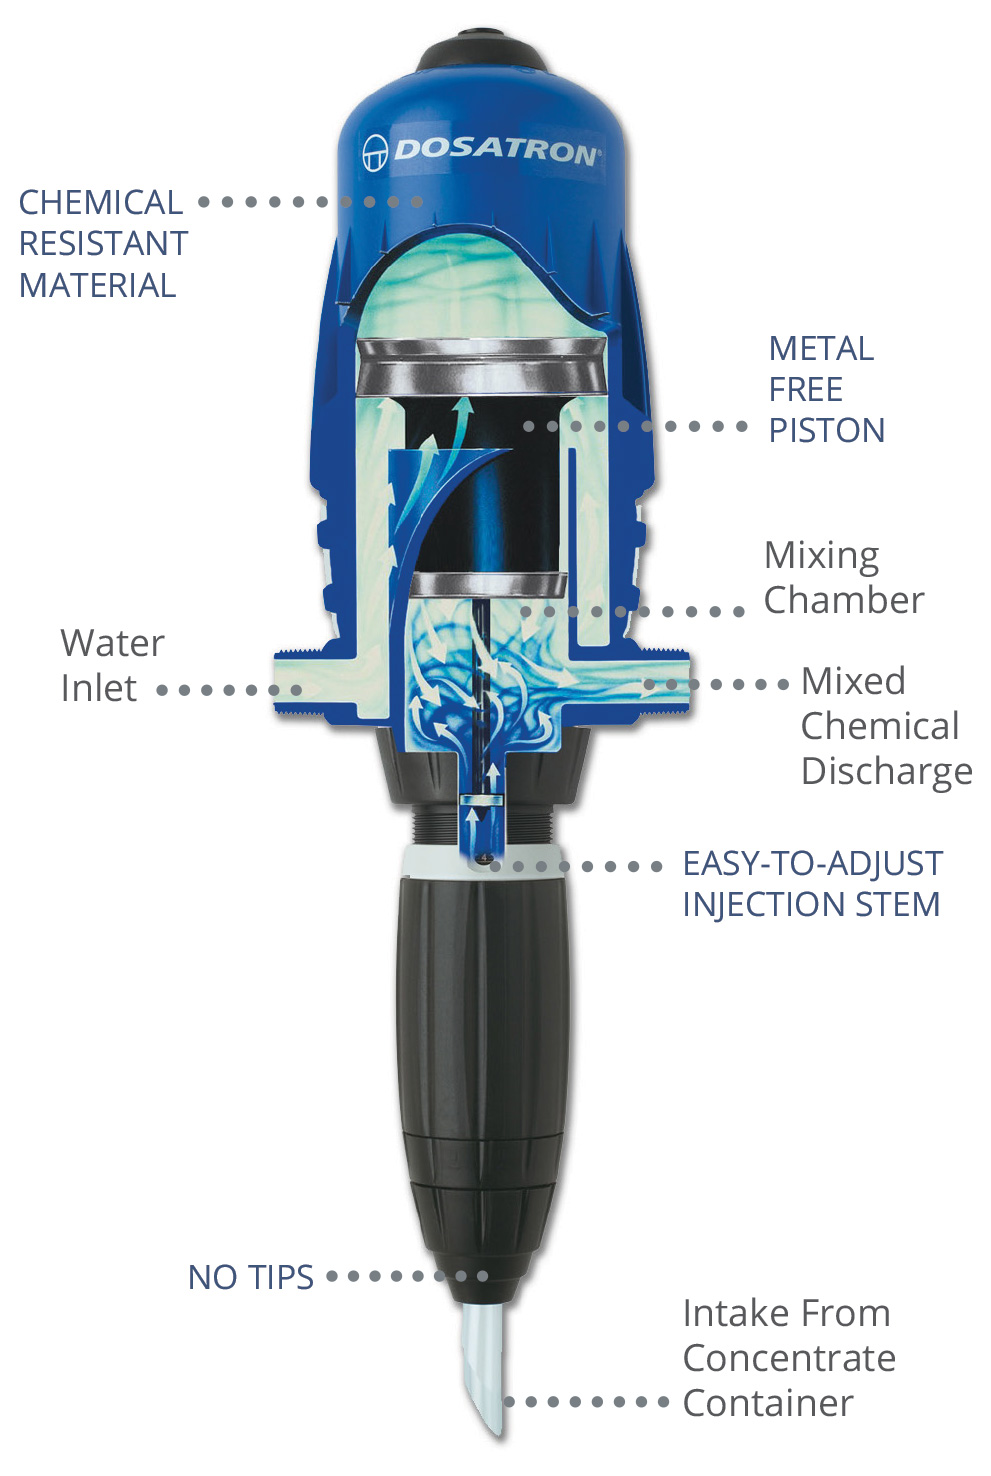 Picture of Chemical Injector, Kynar Body, MAX 14 GPM, 85 PSI, 10:1 to 100:1 Injection Ratio, 1/2" MPT, Aflas Seal